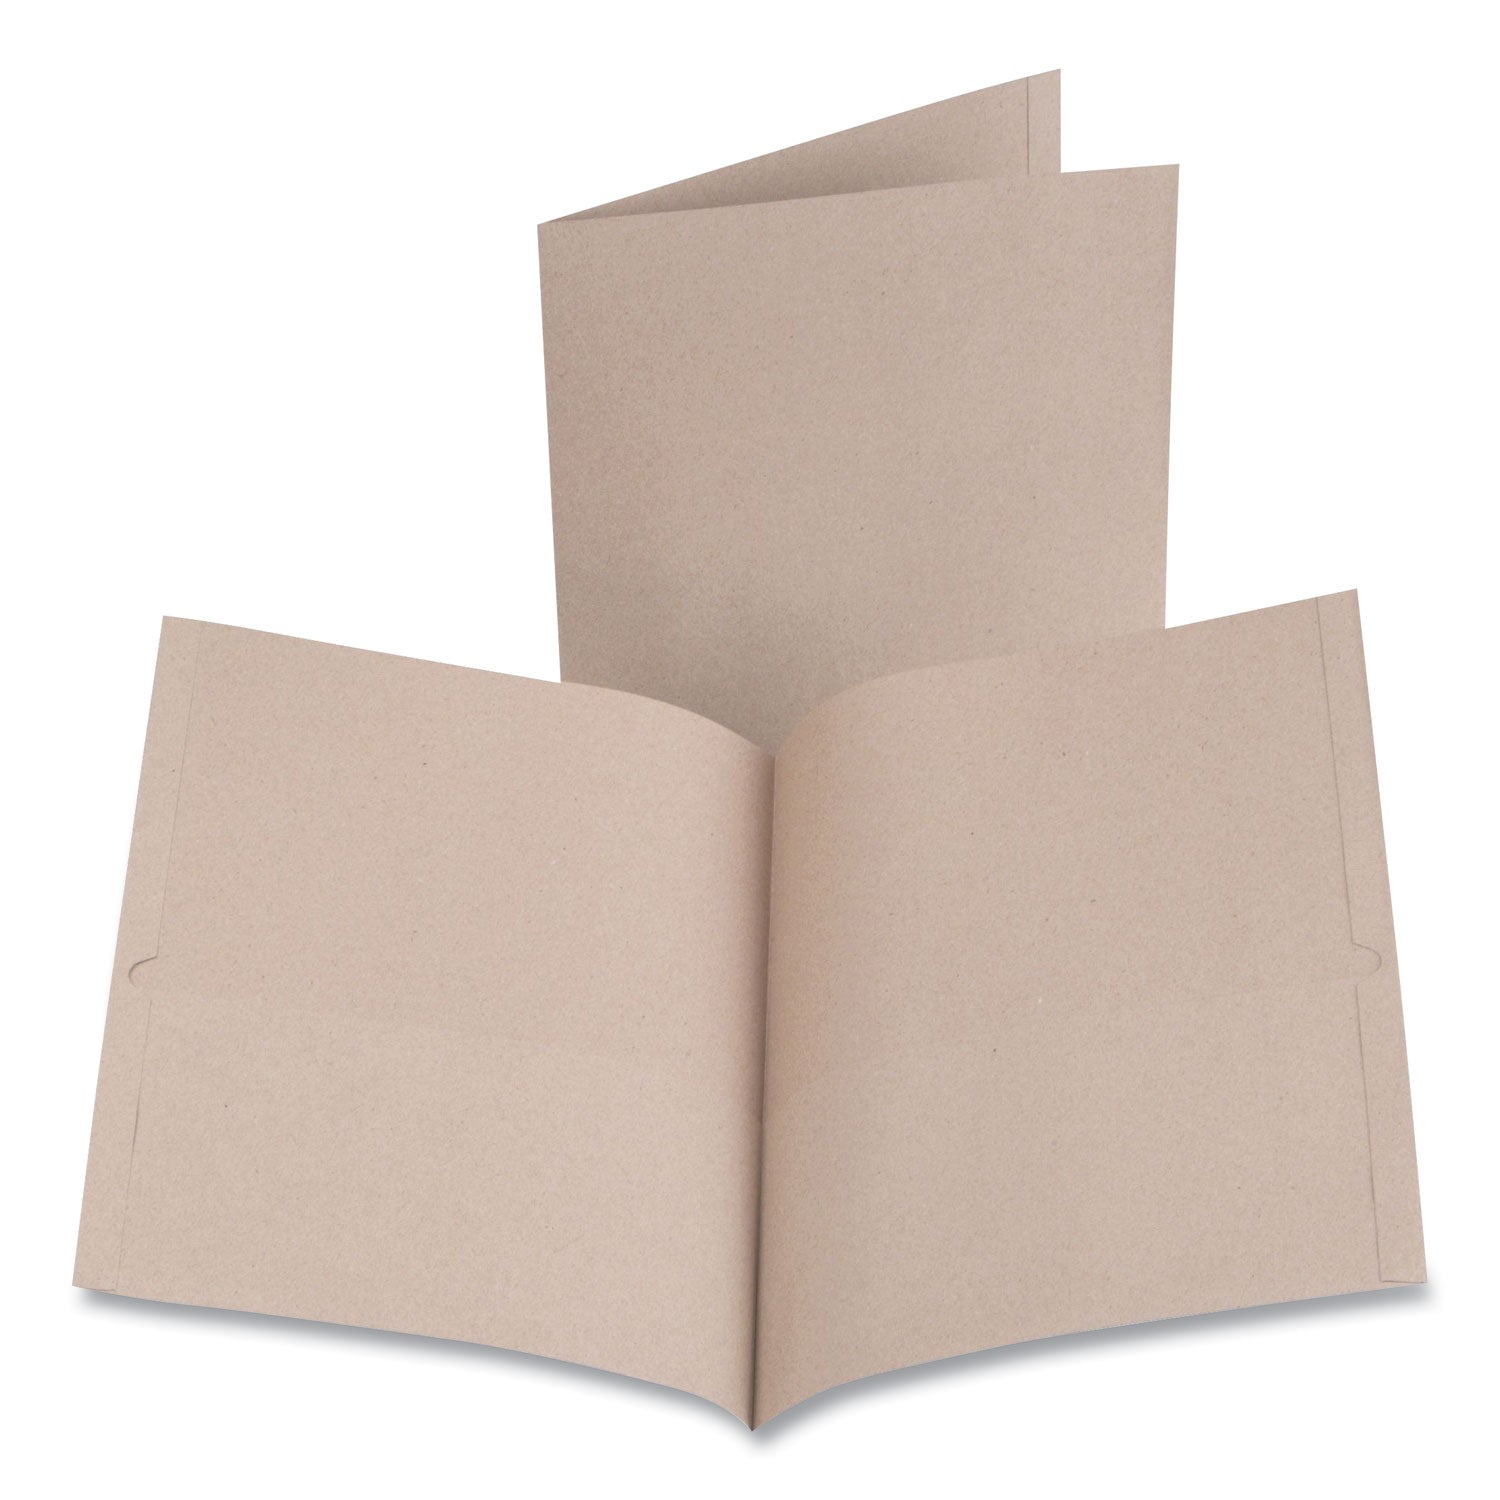 earthwise-by-oxford-100%-recycled-paper-twin-pocket-portfolio-100-sheet-capacity-11-x-85-natural-10-pack_oxf00574 - 1